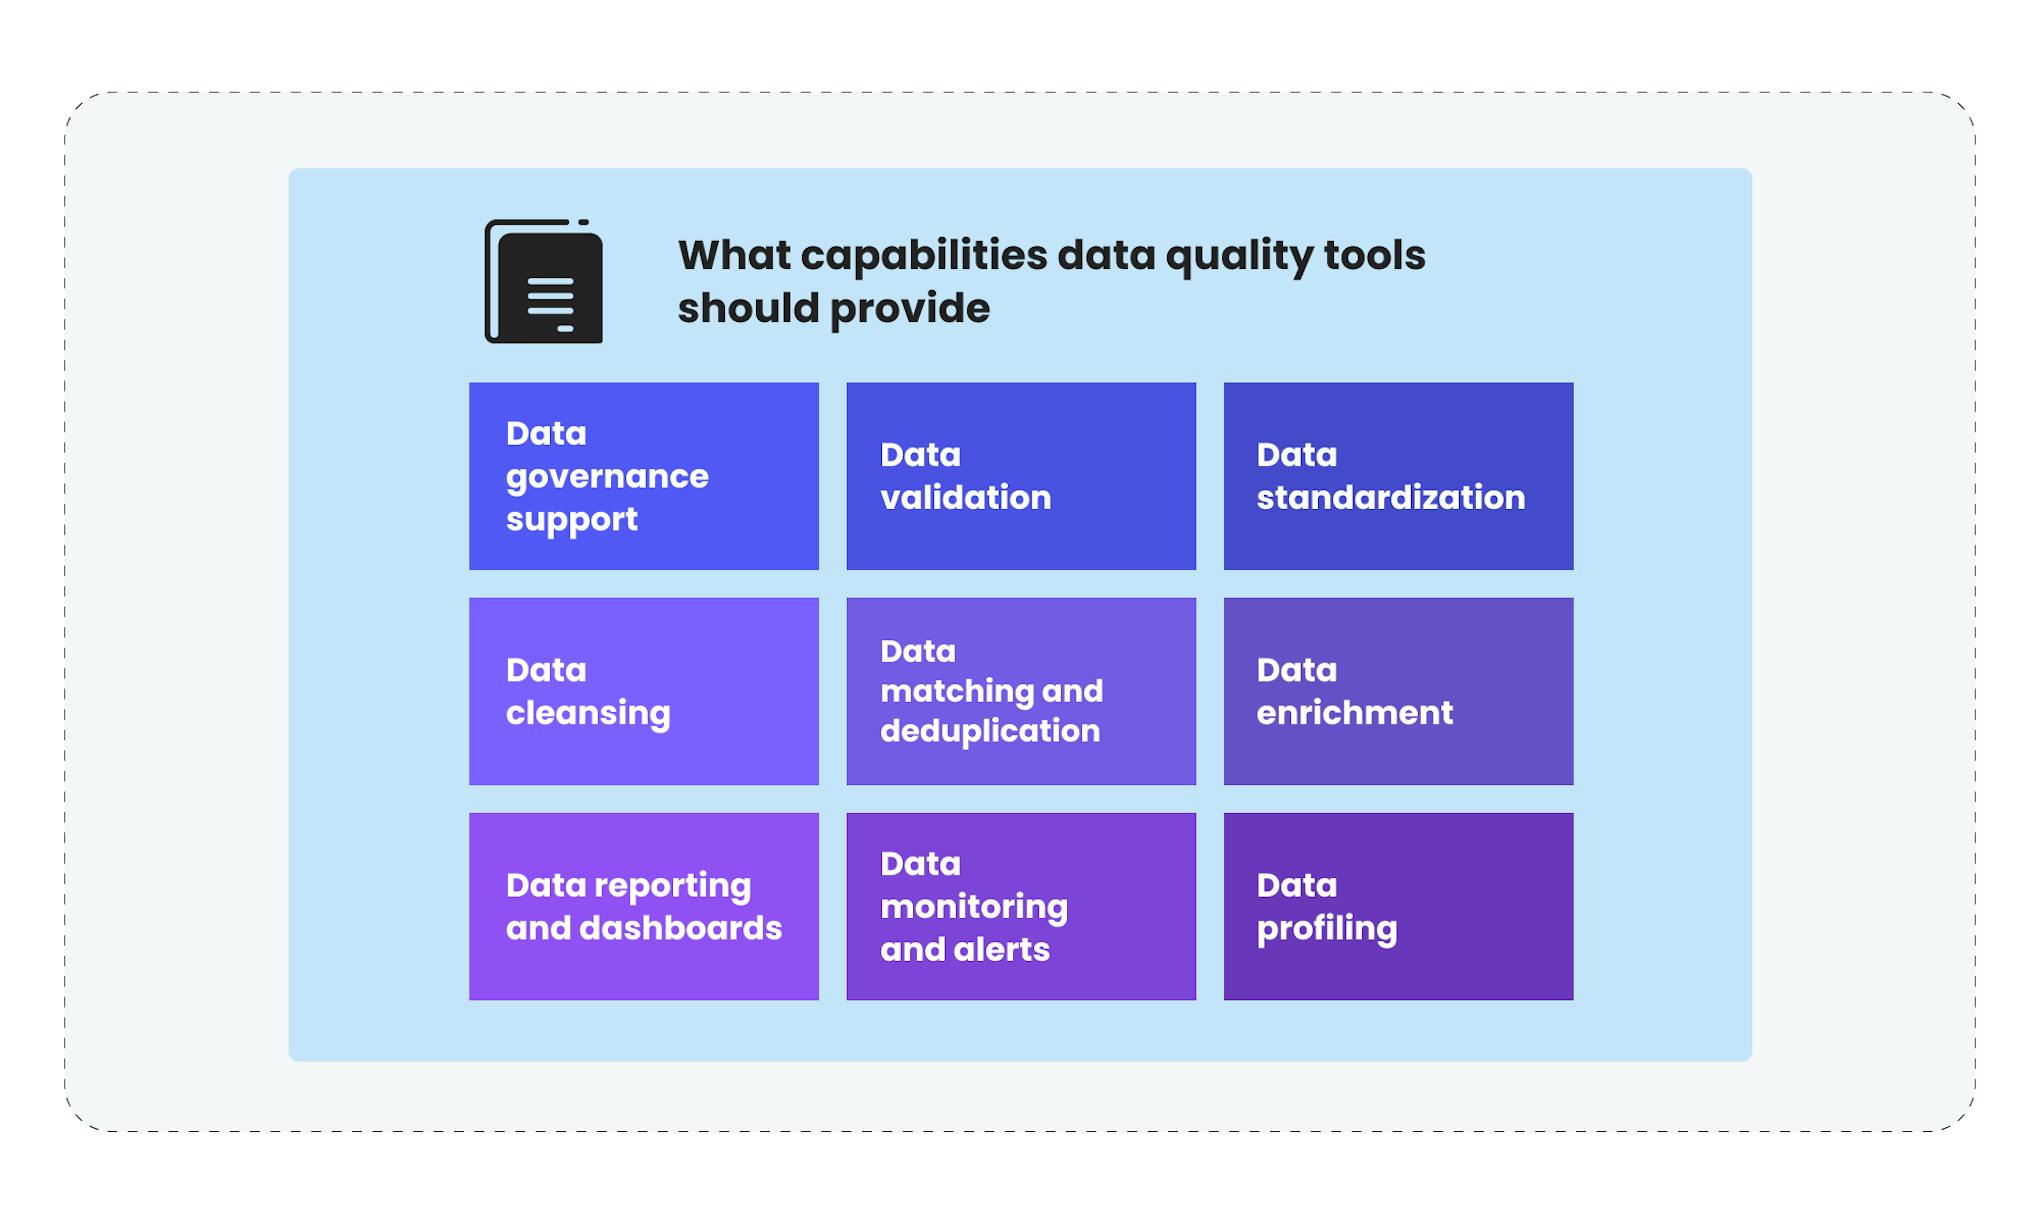 What capabilities data quality tools should provide